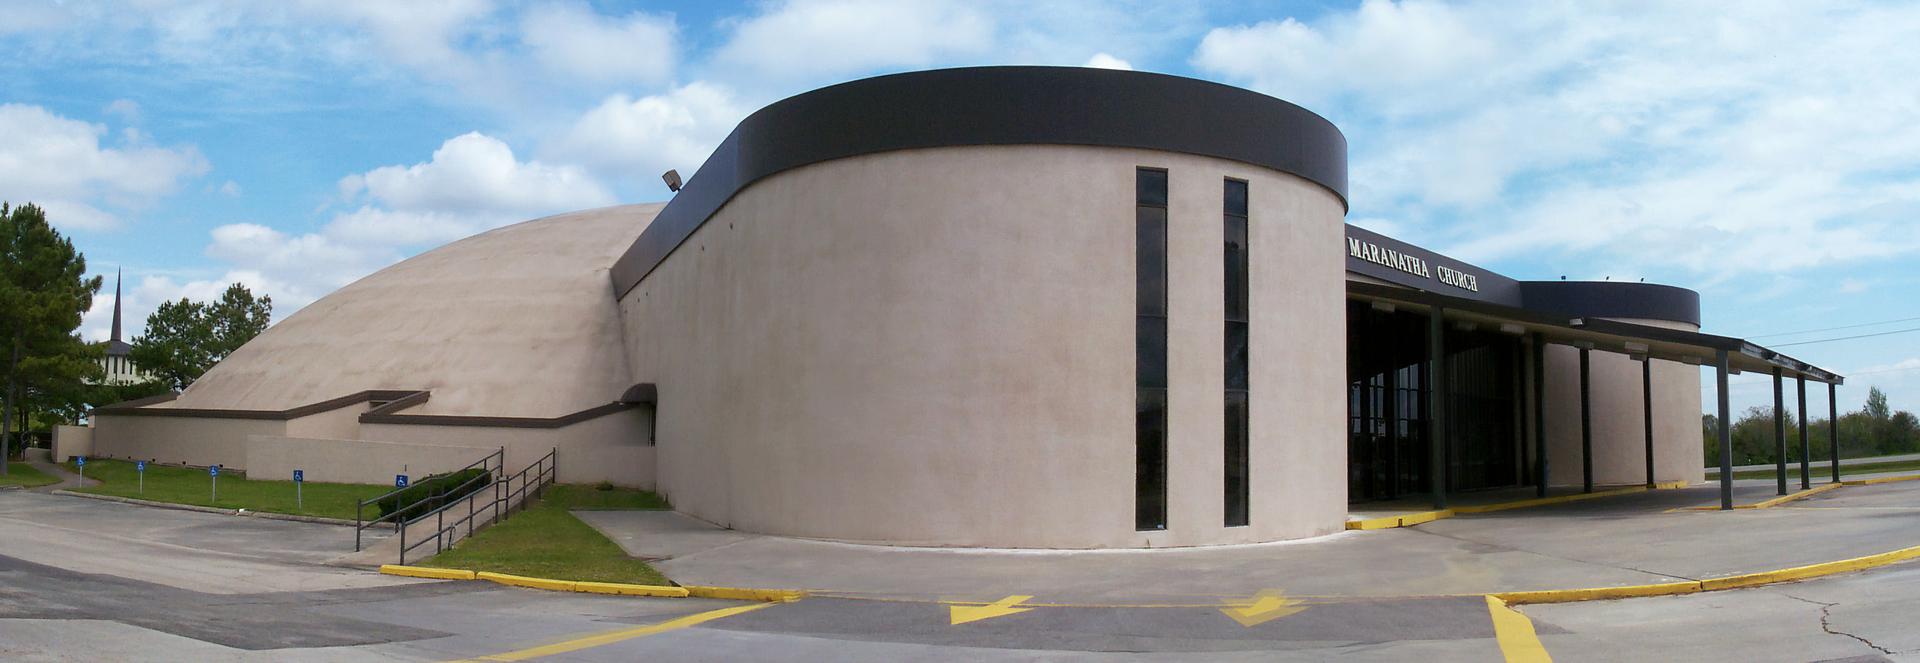 With its two towers flanking its entrance, Hillside's concrete dome church sanctuary is a magnificent piece of architecture. But it's also strong enough to withstand a Category 4 hurricane with no damage.